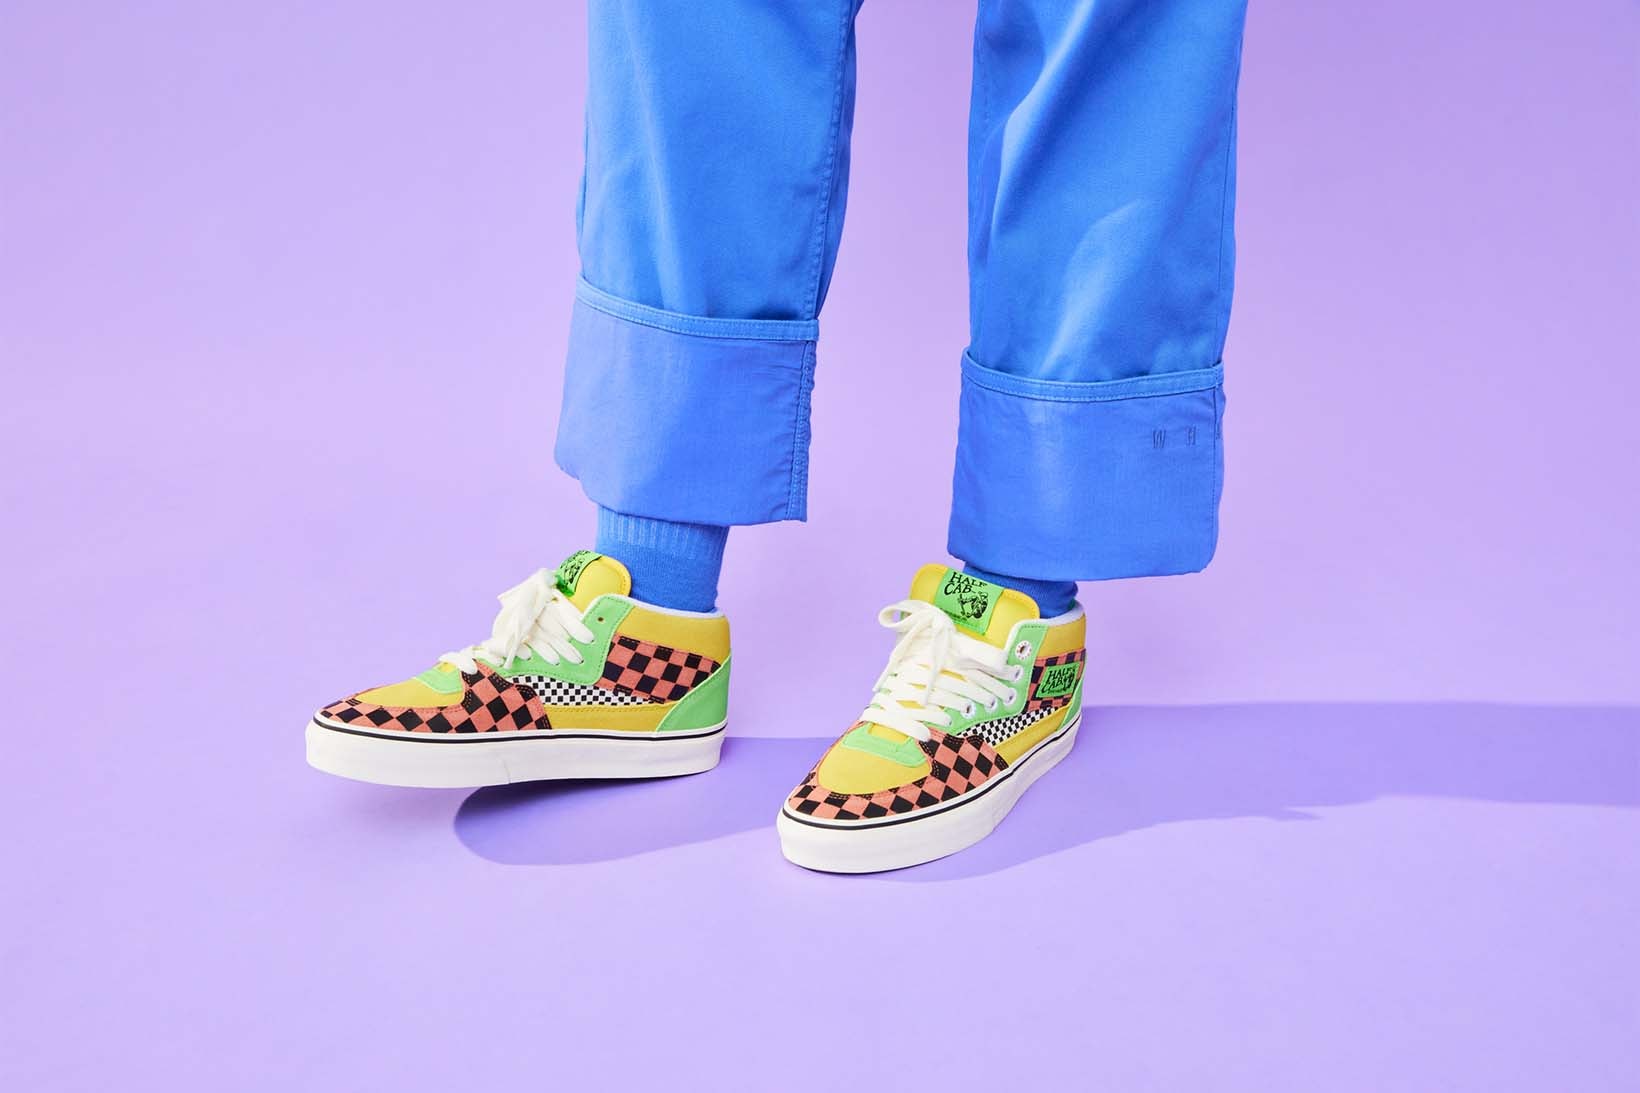 Vans Tierra Whack Half Cab Blue Chinos Collaboration Release Date